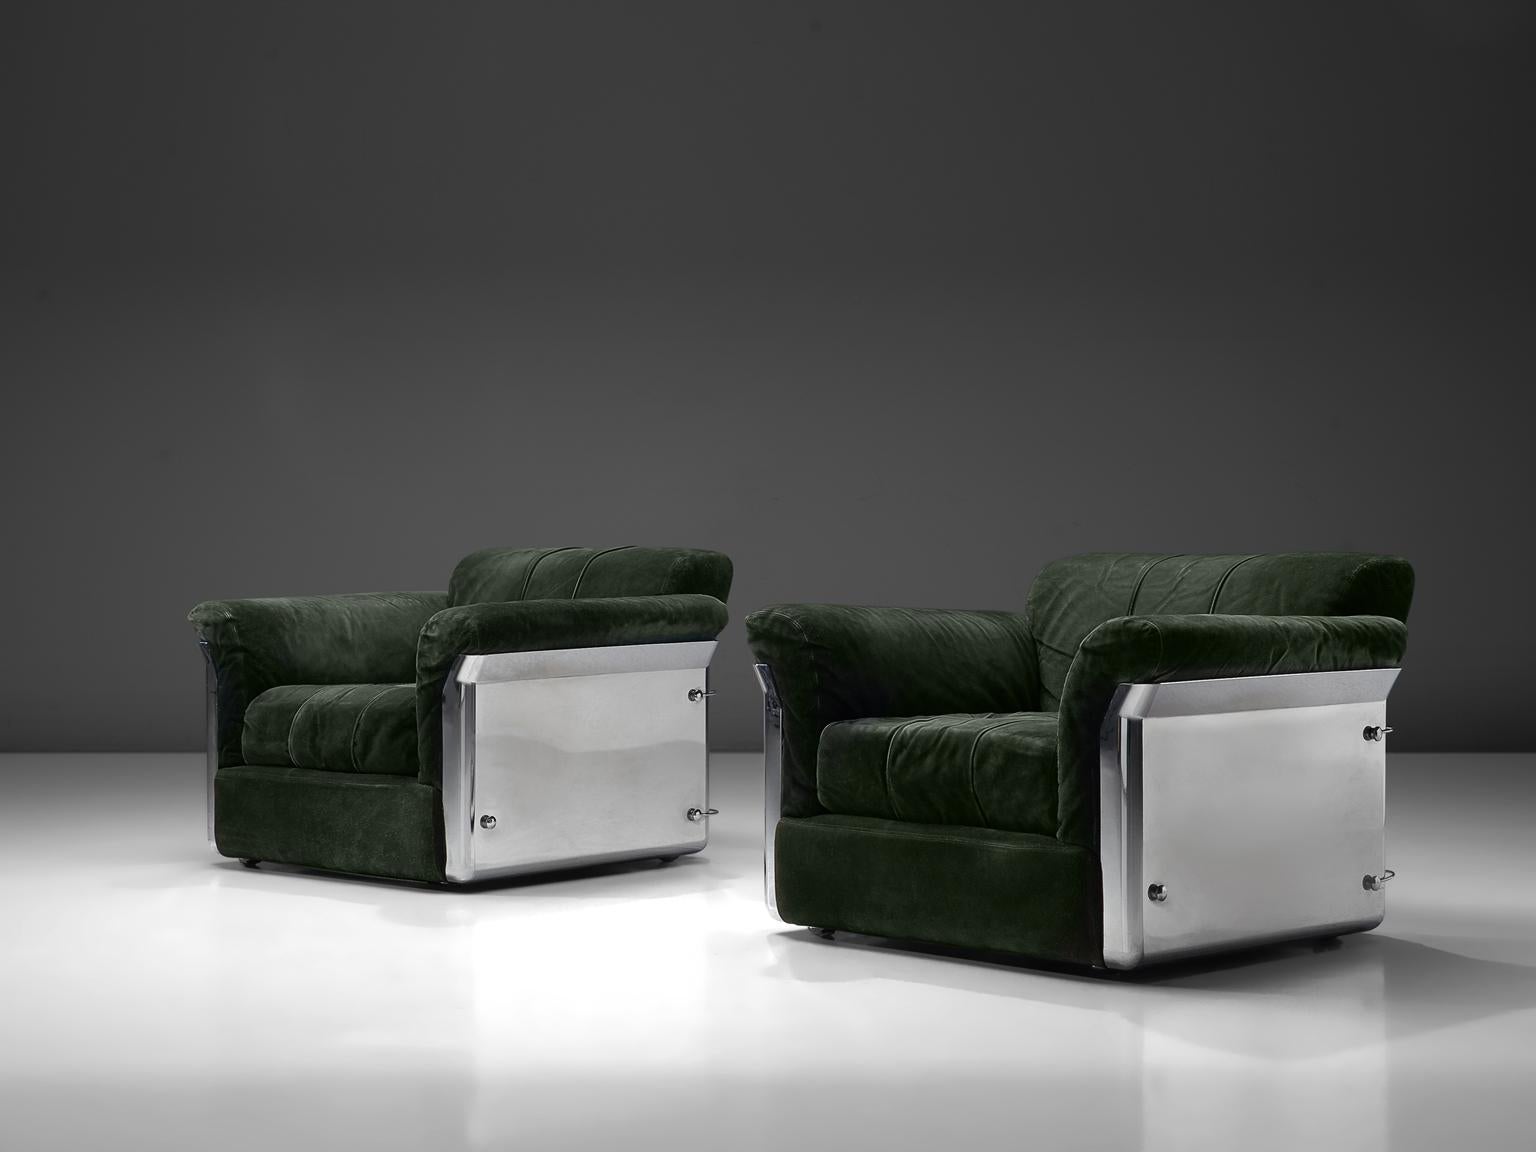 Vittorio Introini for Saporiti, pair of lounge chairs, in suede and chrome, Italy,1969 

This set of two lounge chairs is designed by Vittorio Introini and produced by Saporiti in chrome and dar green upholstery. The lounge chairs feature a steel